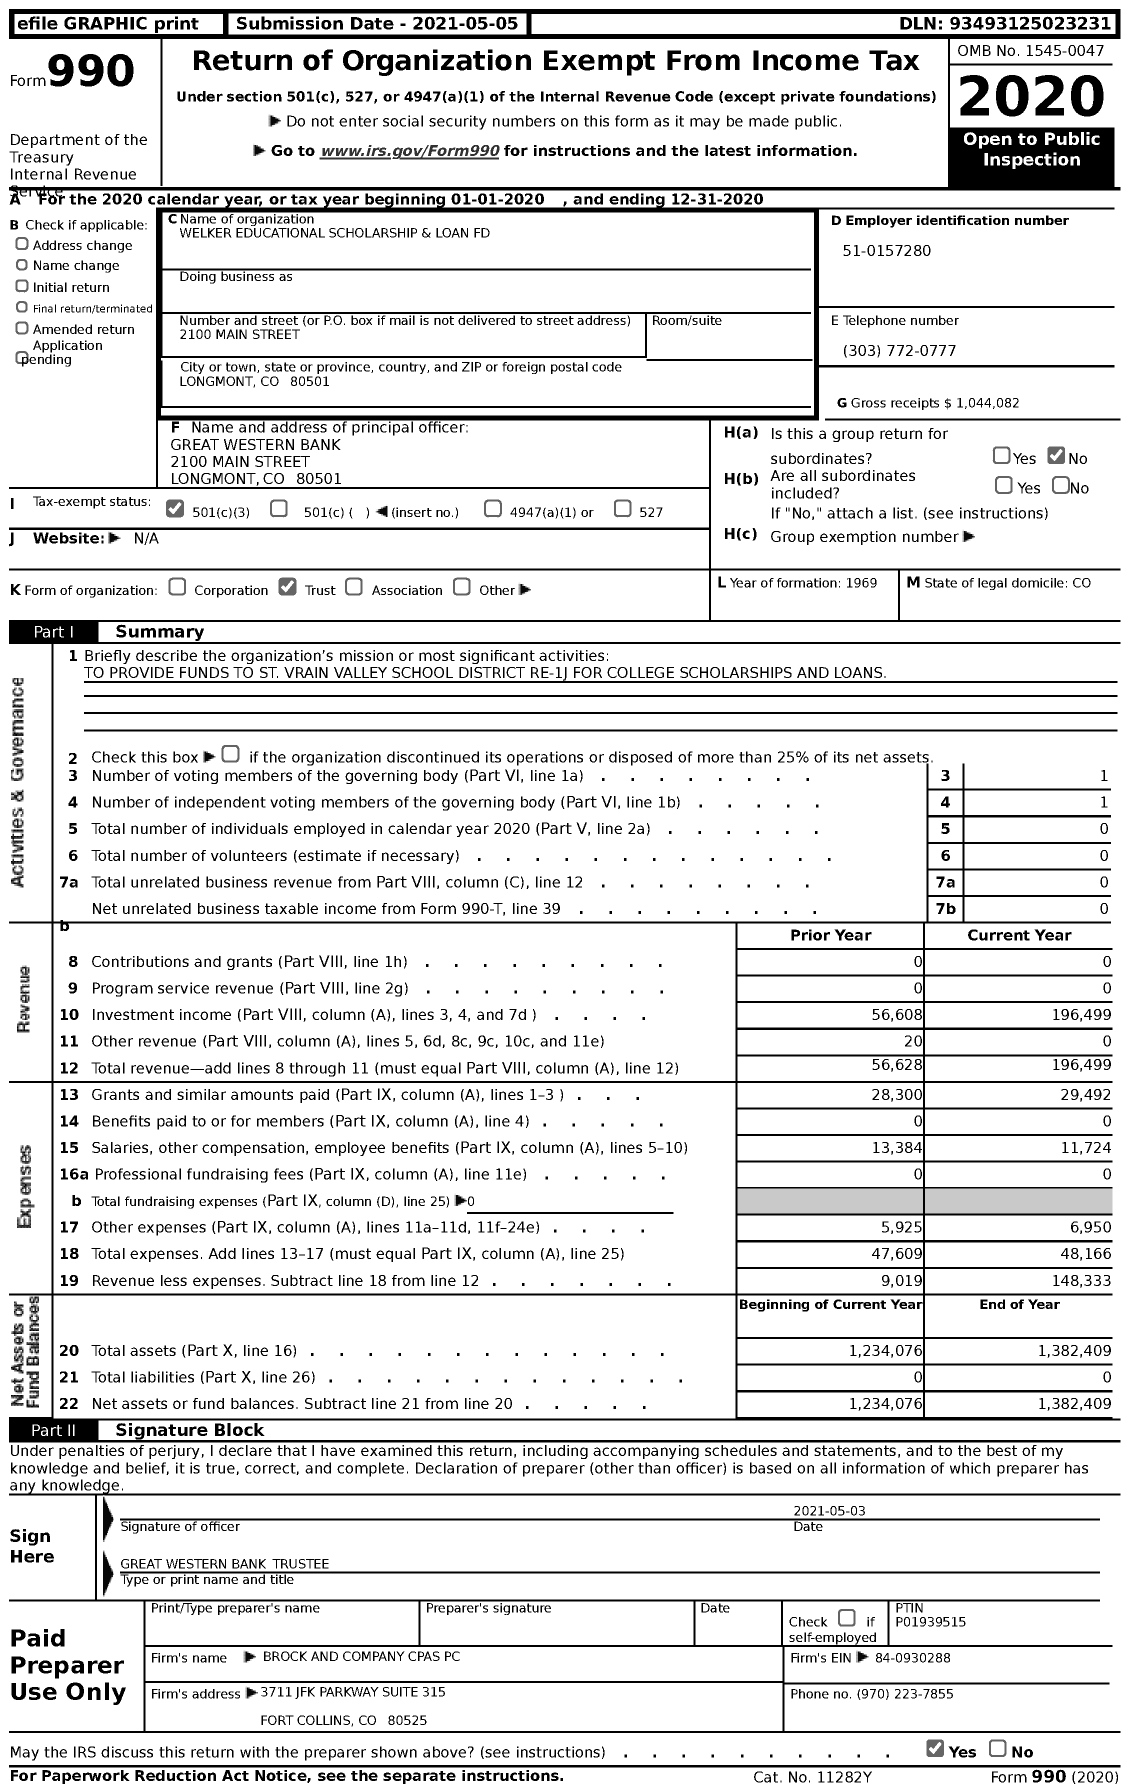 Image of first page of 2020 Form 990 for Welker Educational Scholarship and Loan FD First Interstate Bank Trustee